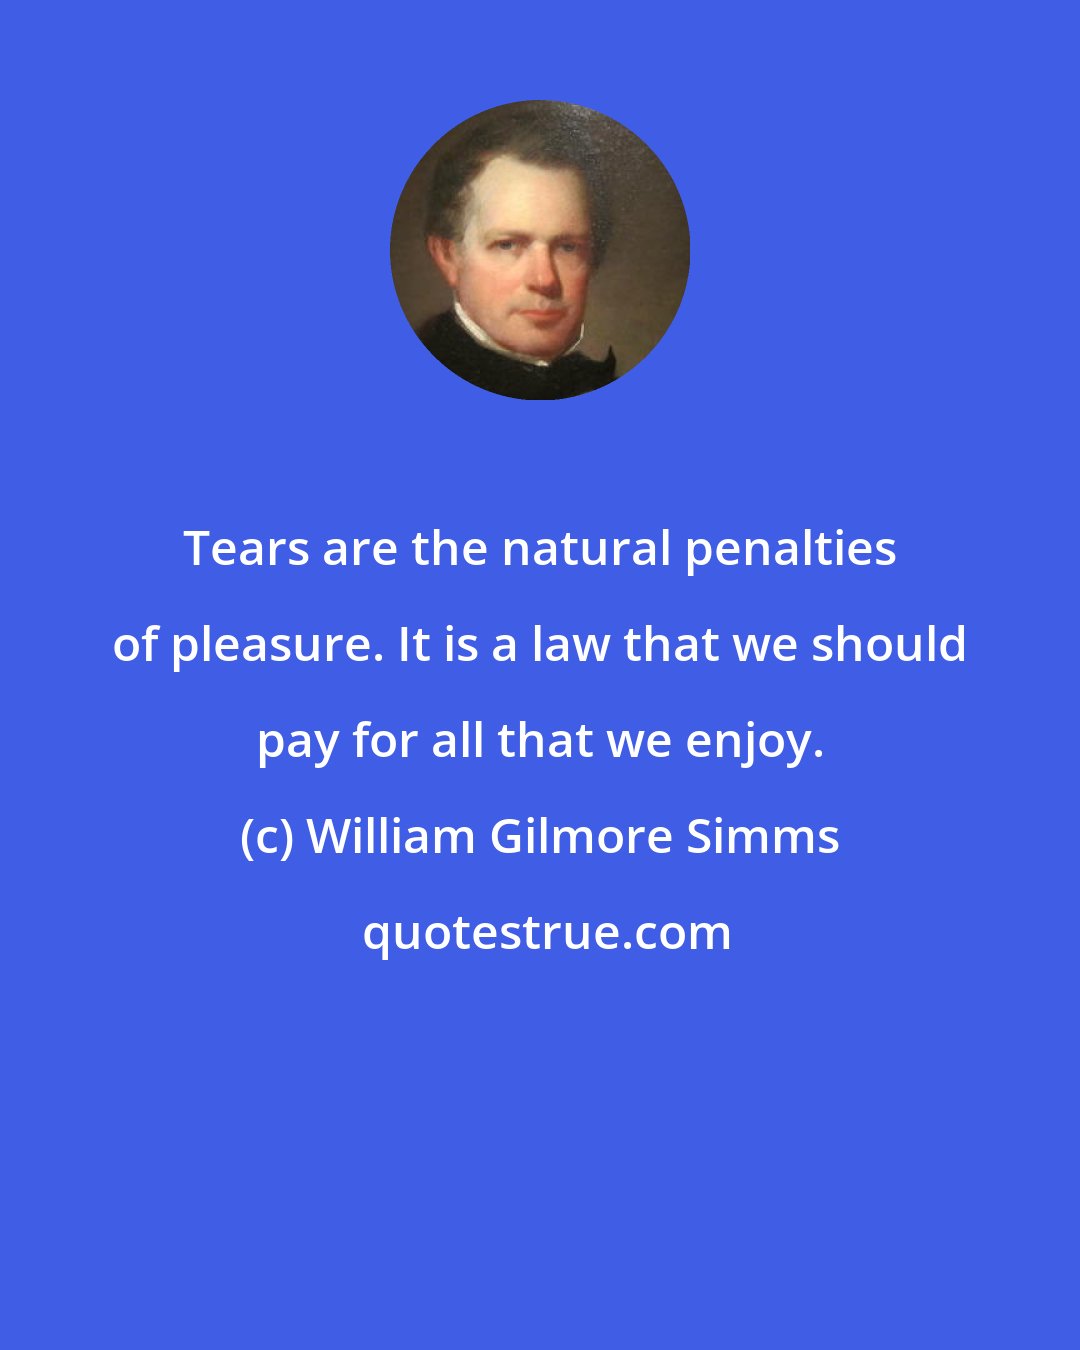 William Gilmore Simms: Tears are the natural penalties of pleasure. It is a law that we should pay for all that we enjoy.